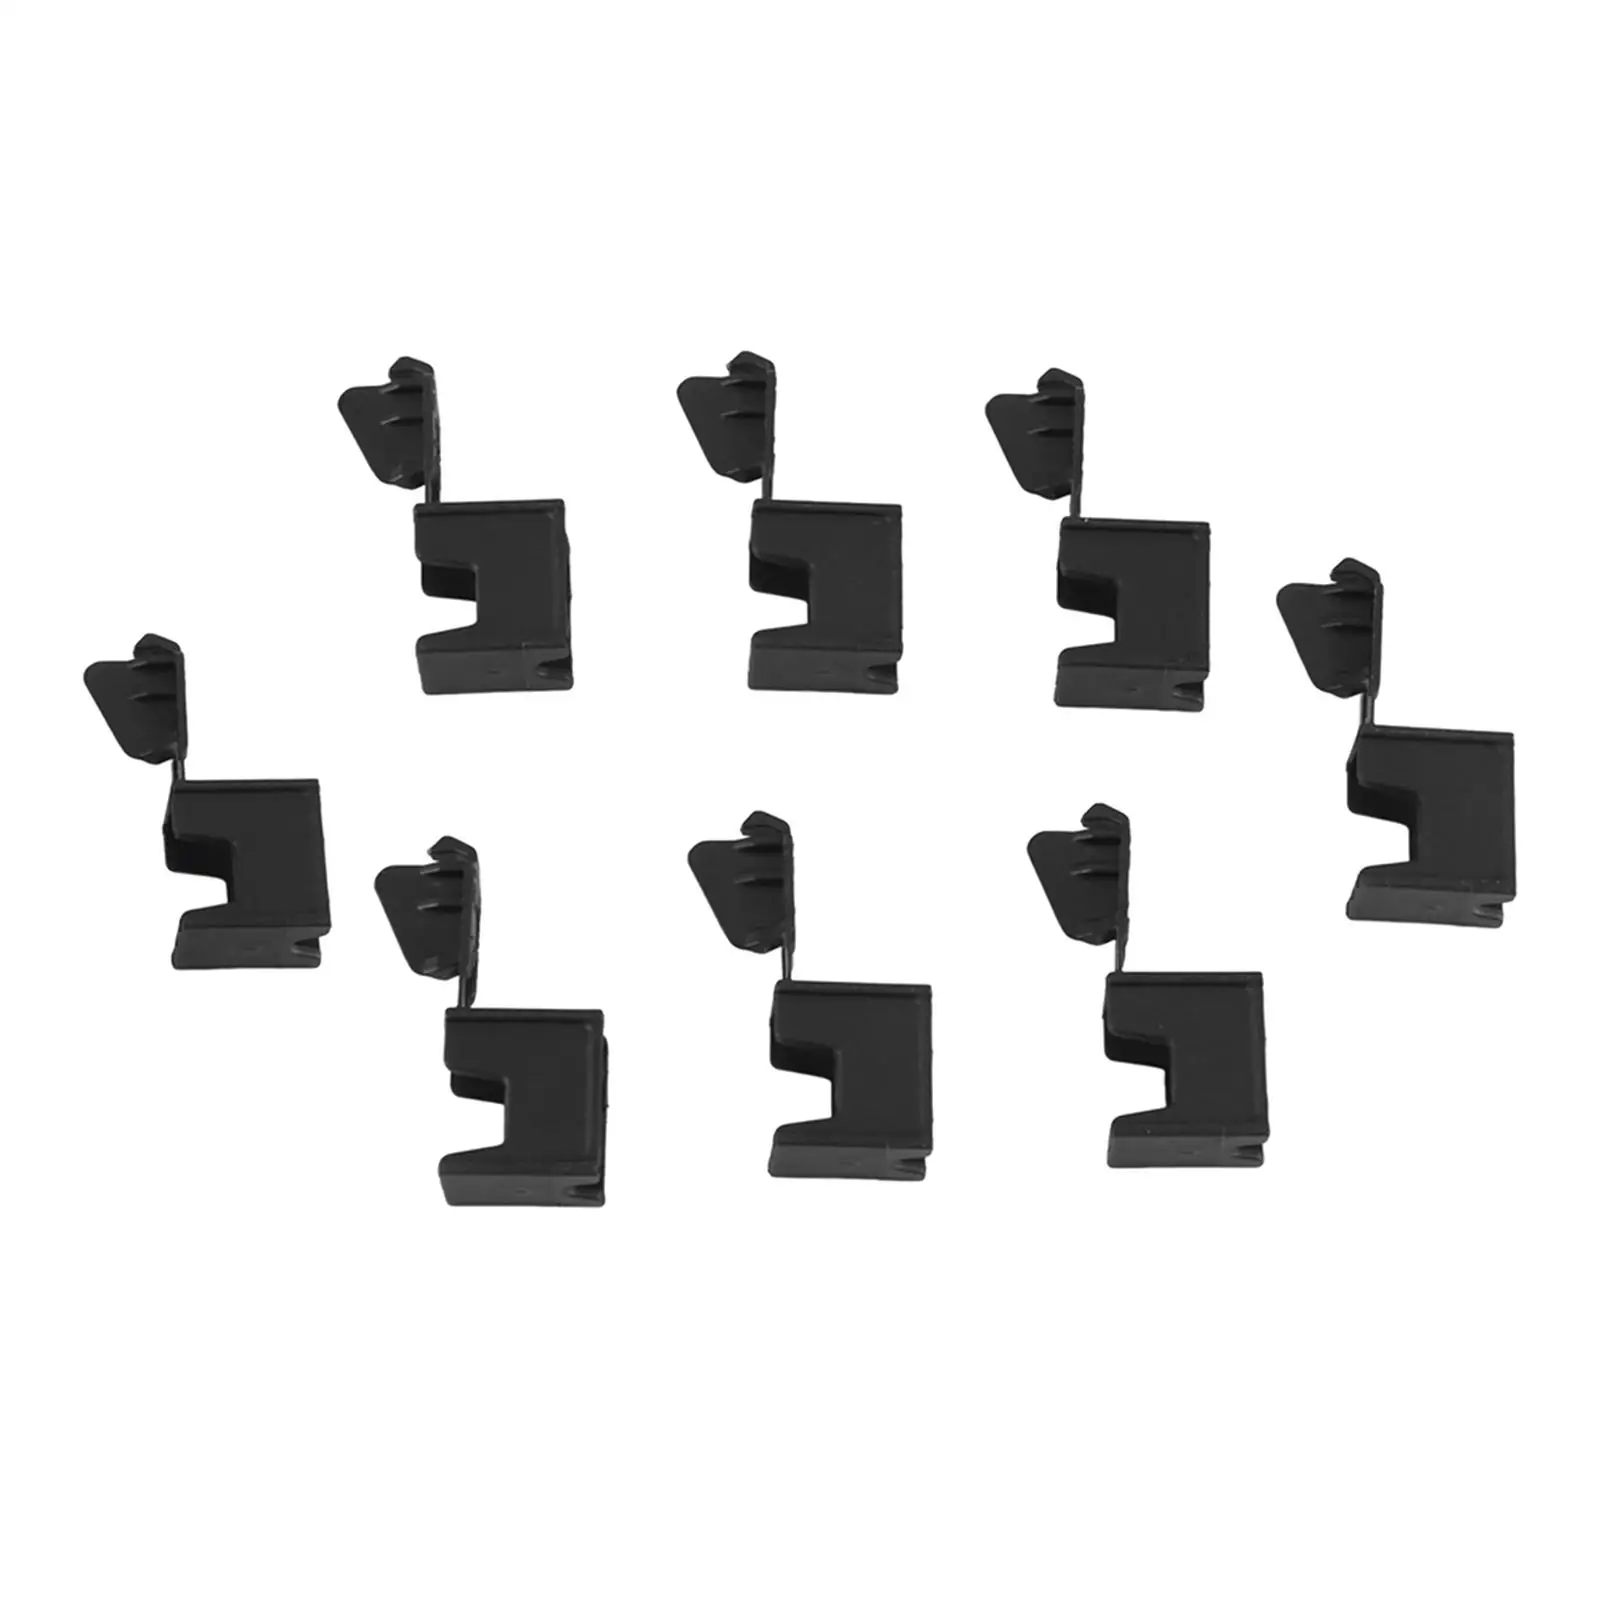 8 Pieces Convertible Roof Top Hinge Cover Clips 54377187747 High Performance Vehicle Black Mounting Clips Parts for BMW E93